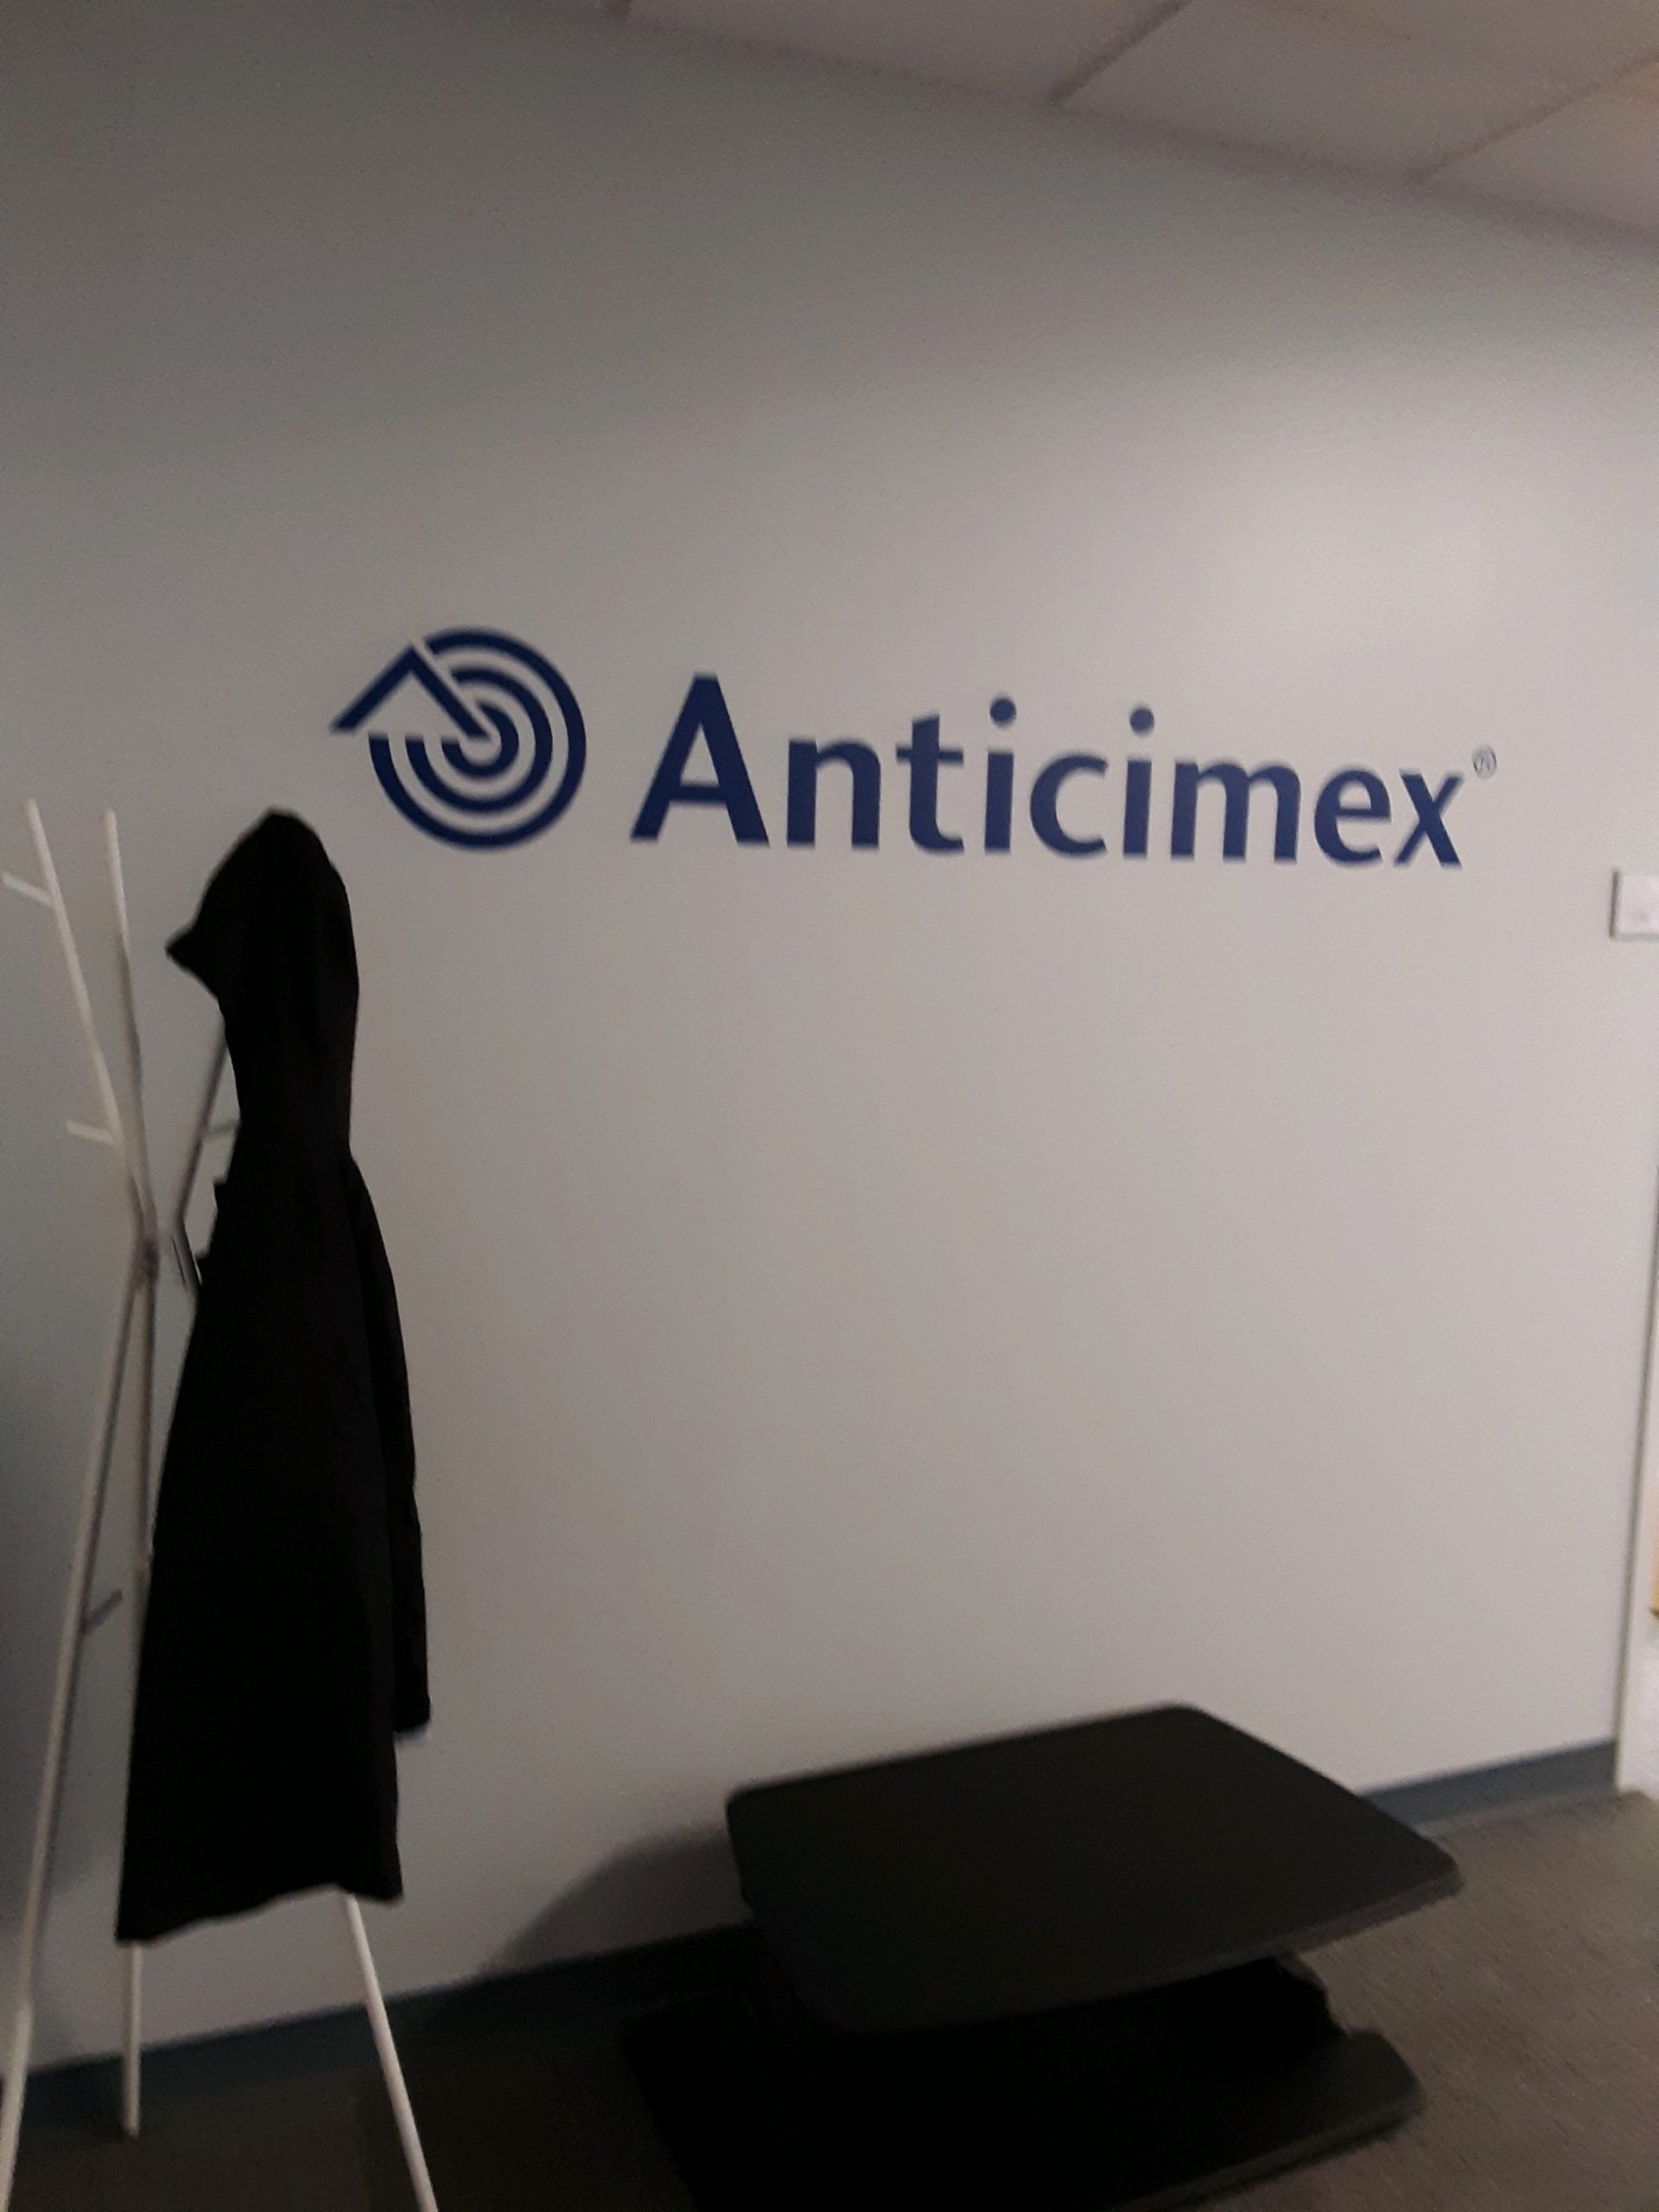 Anticimex written in blue on white wall with coat hanger in front of it with a black coat